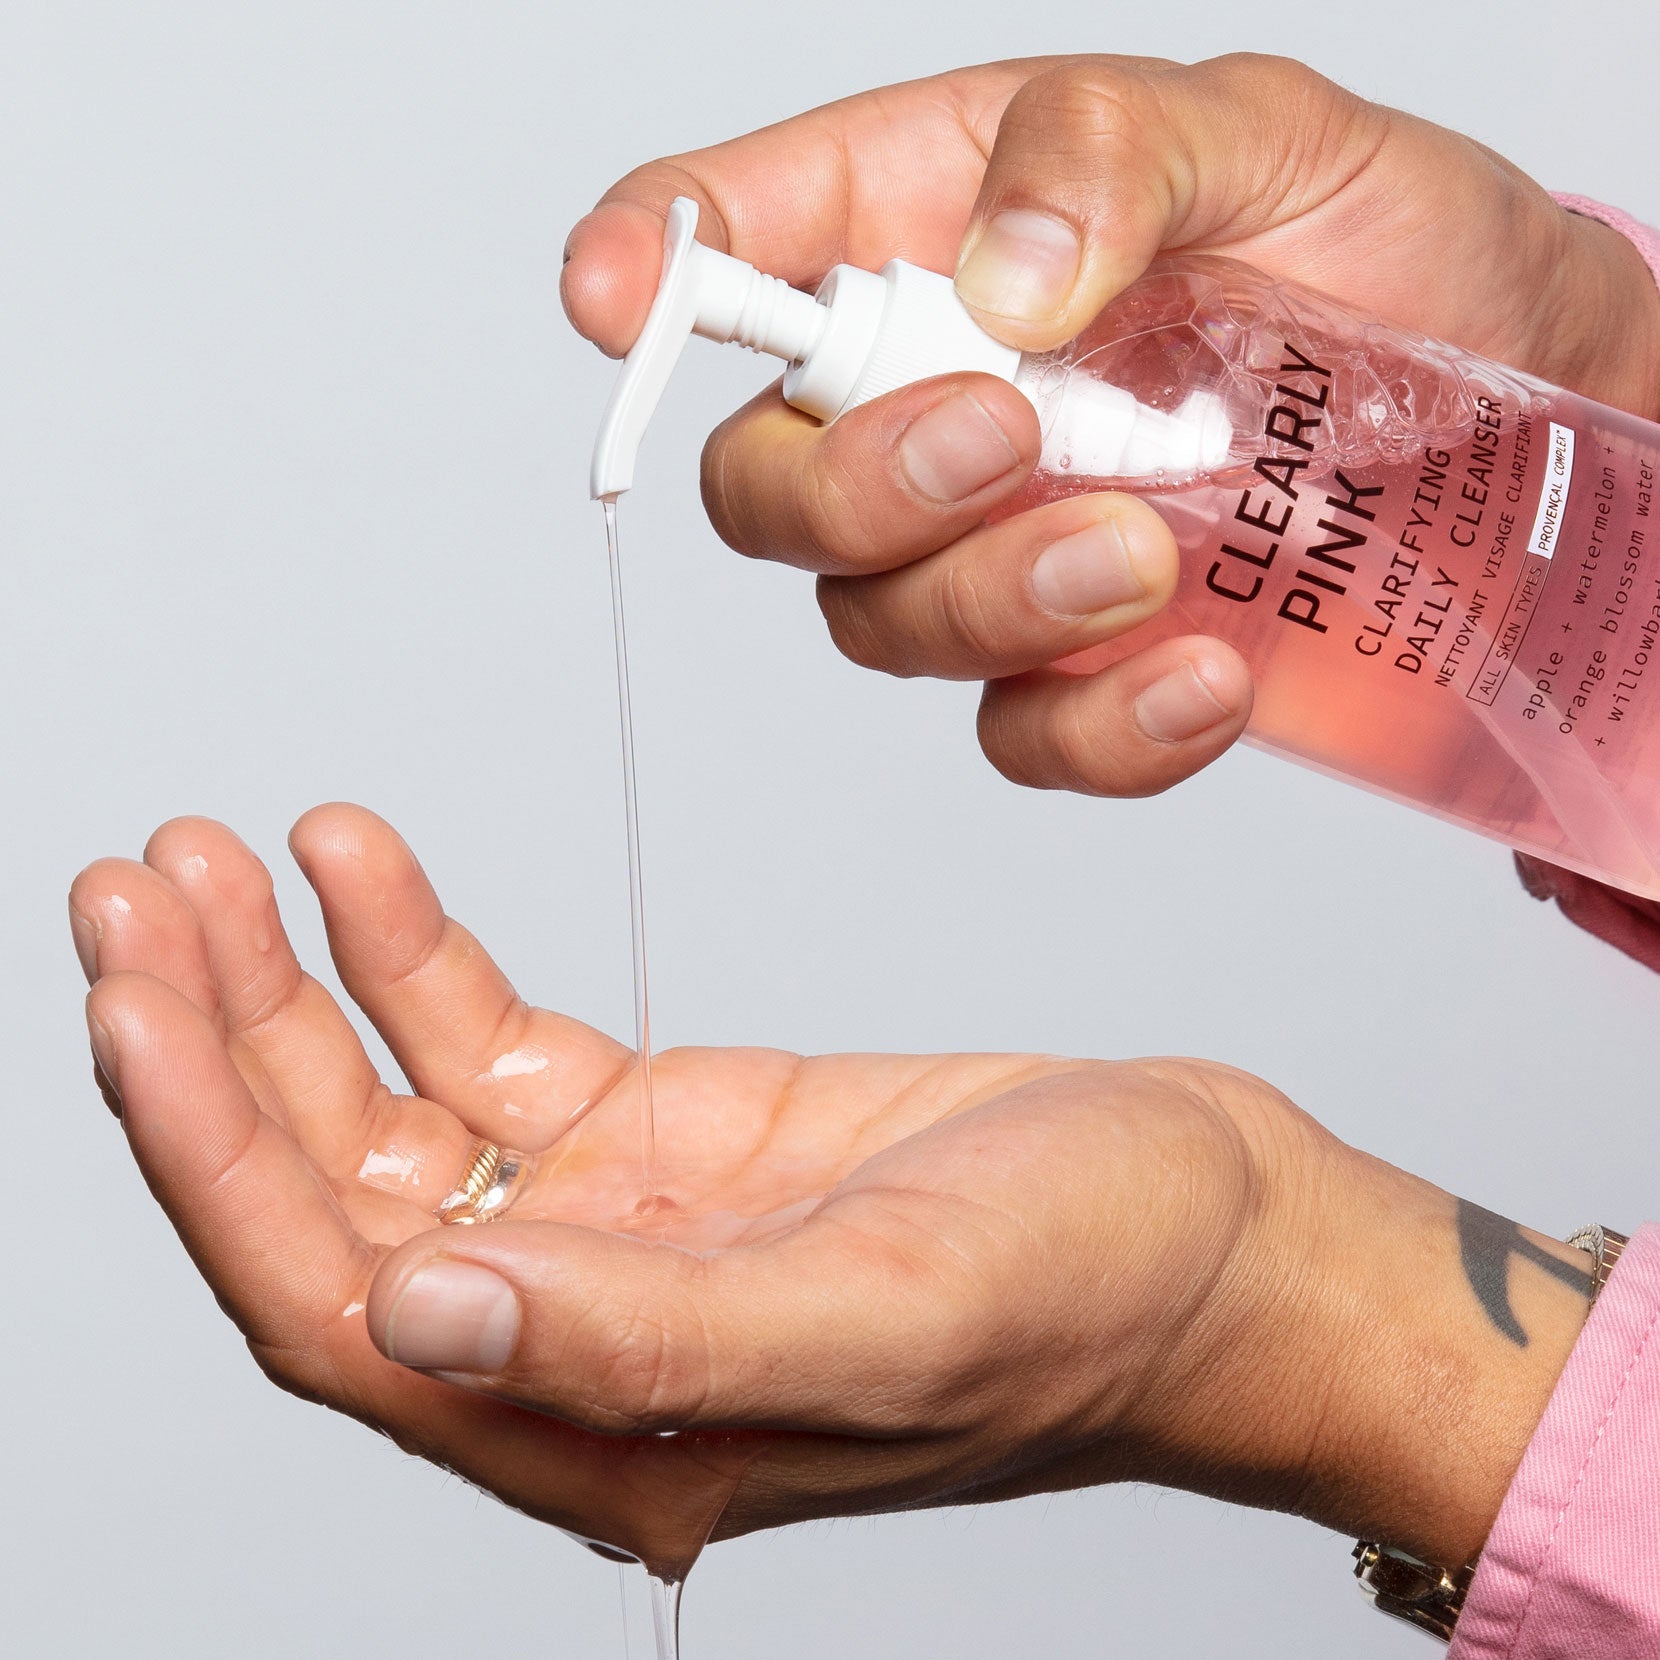 A photo of a model’s hands holding Clearly Pink Clarifying Cleanser and pressing down on the hand pump for the product liquid to run down through his hand and dripping down below. Showcasing the consistency of the product.